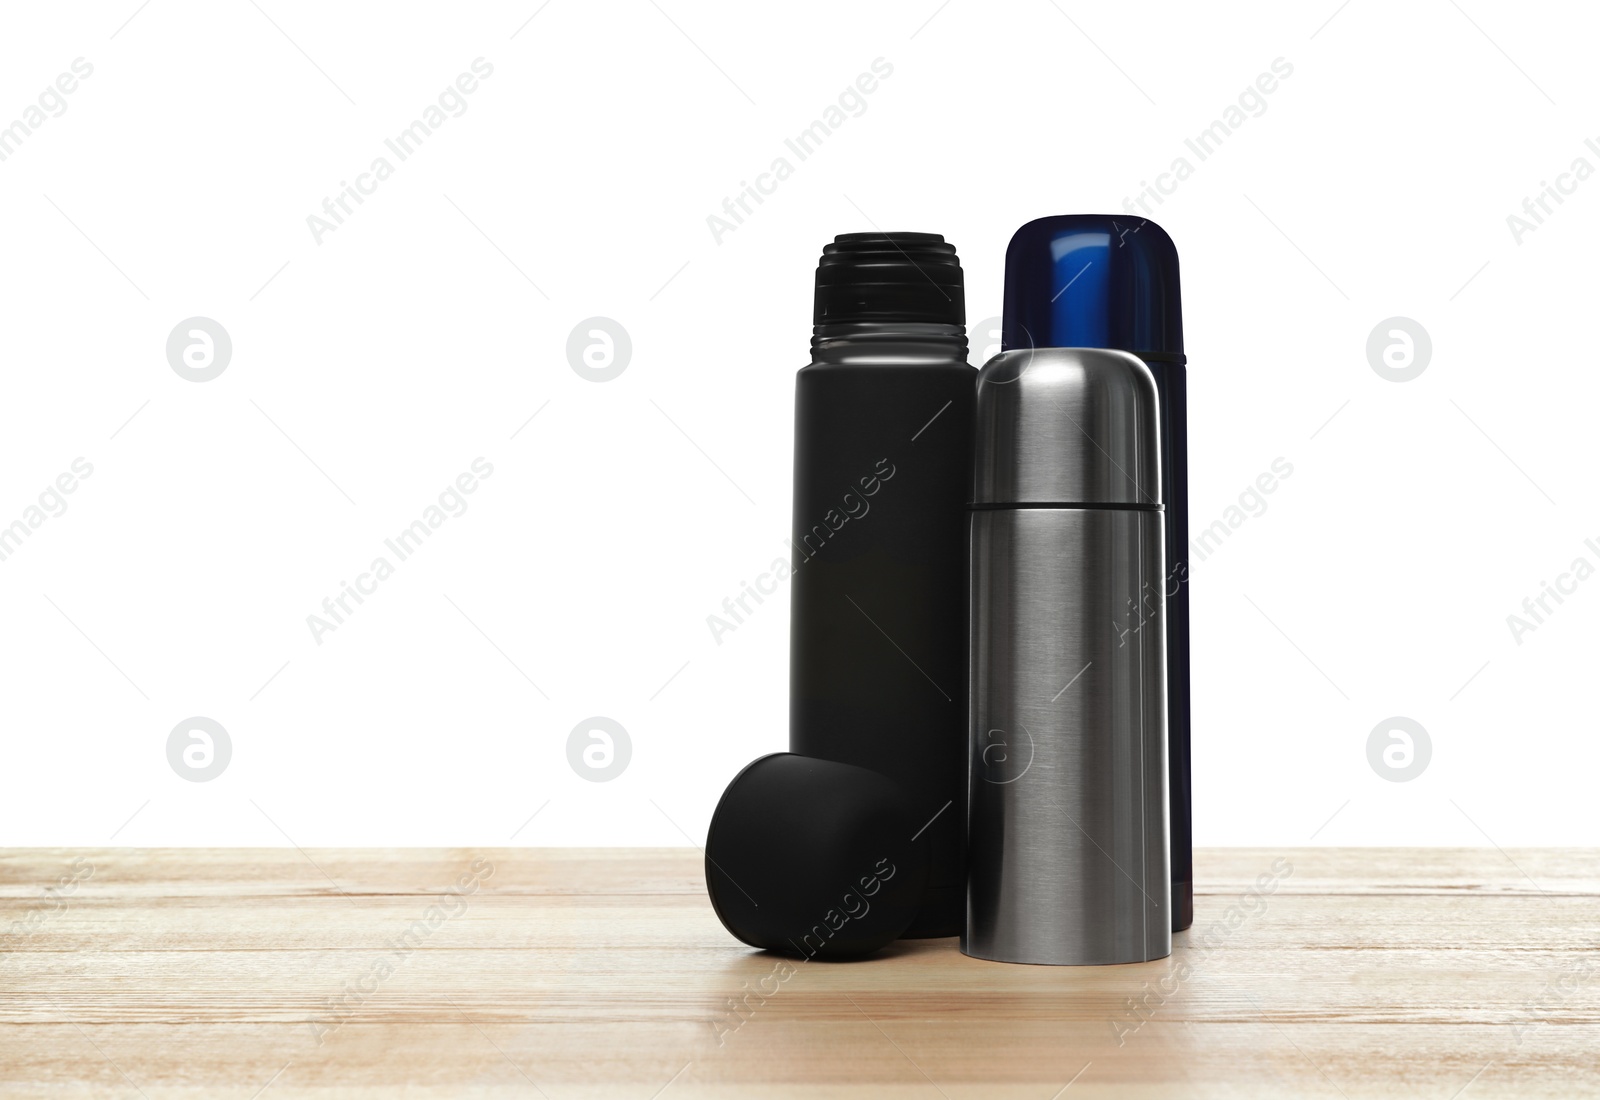 Photo of Stylish thermo bottles on wooden table against white background